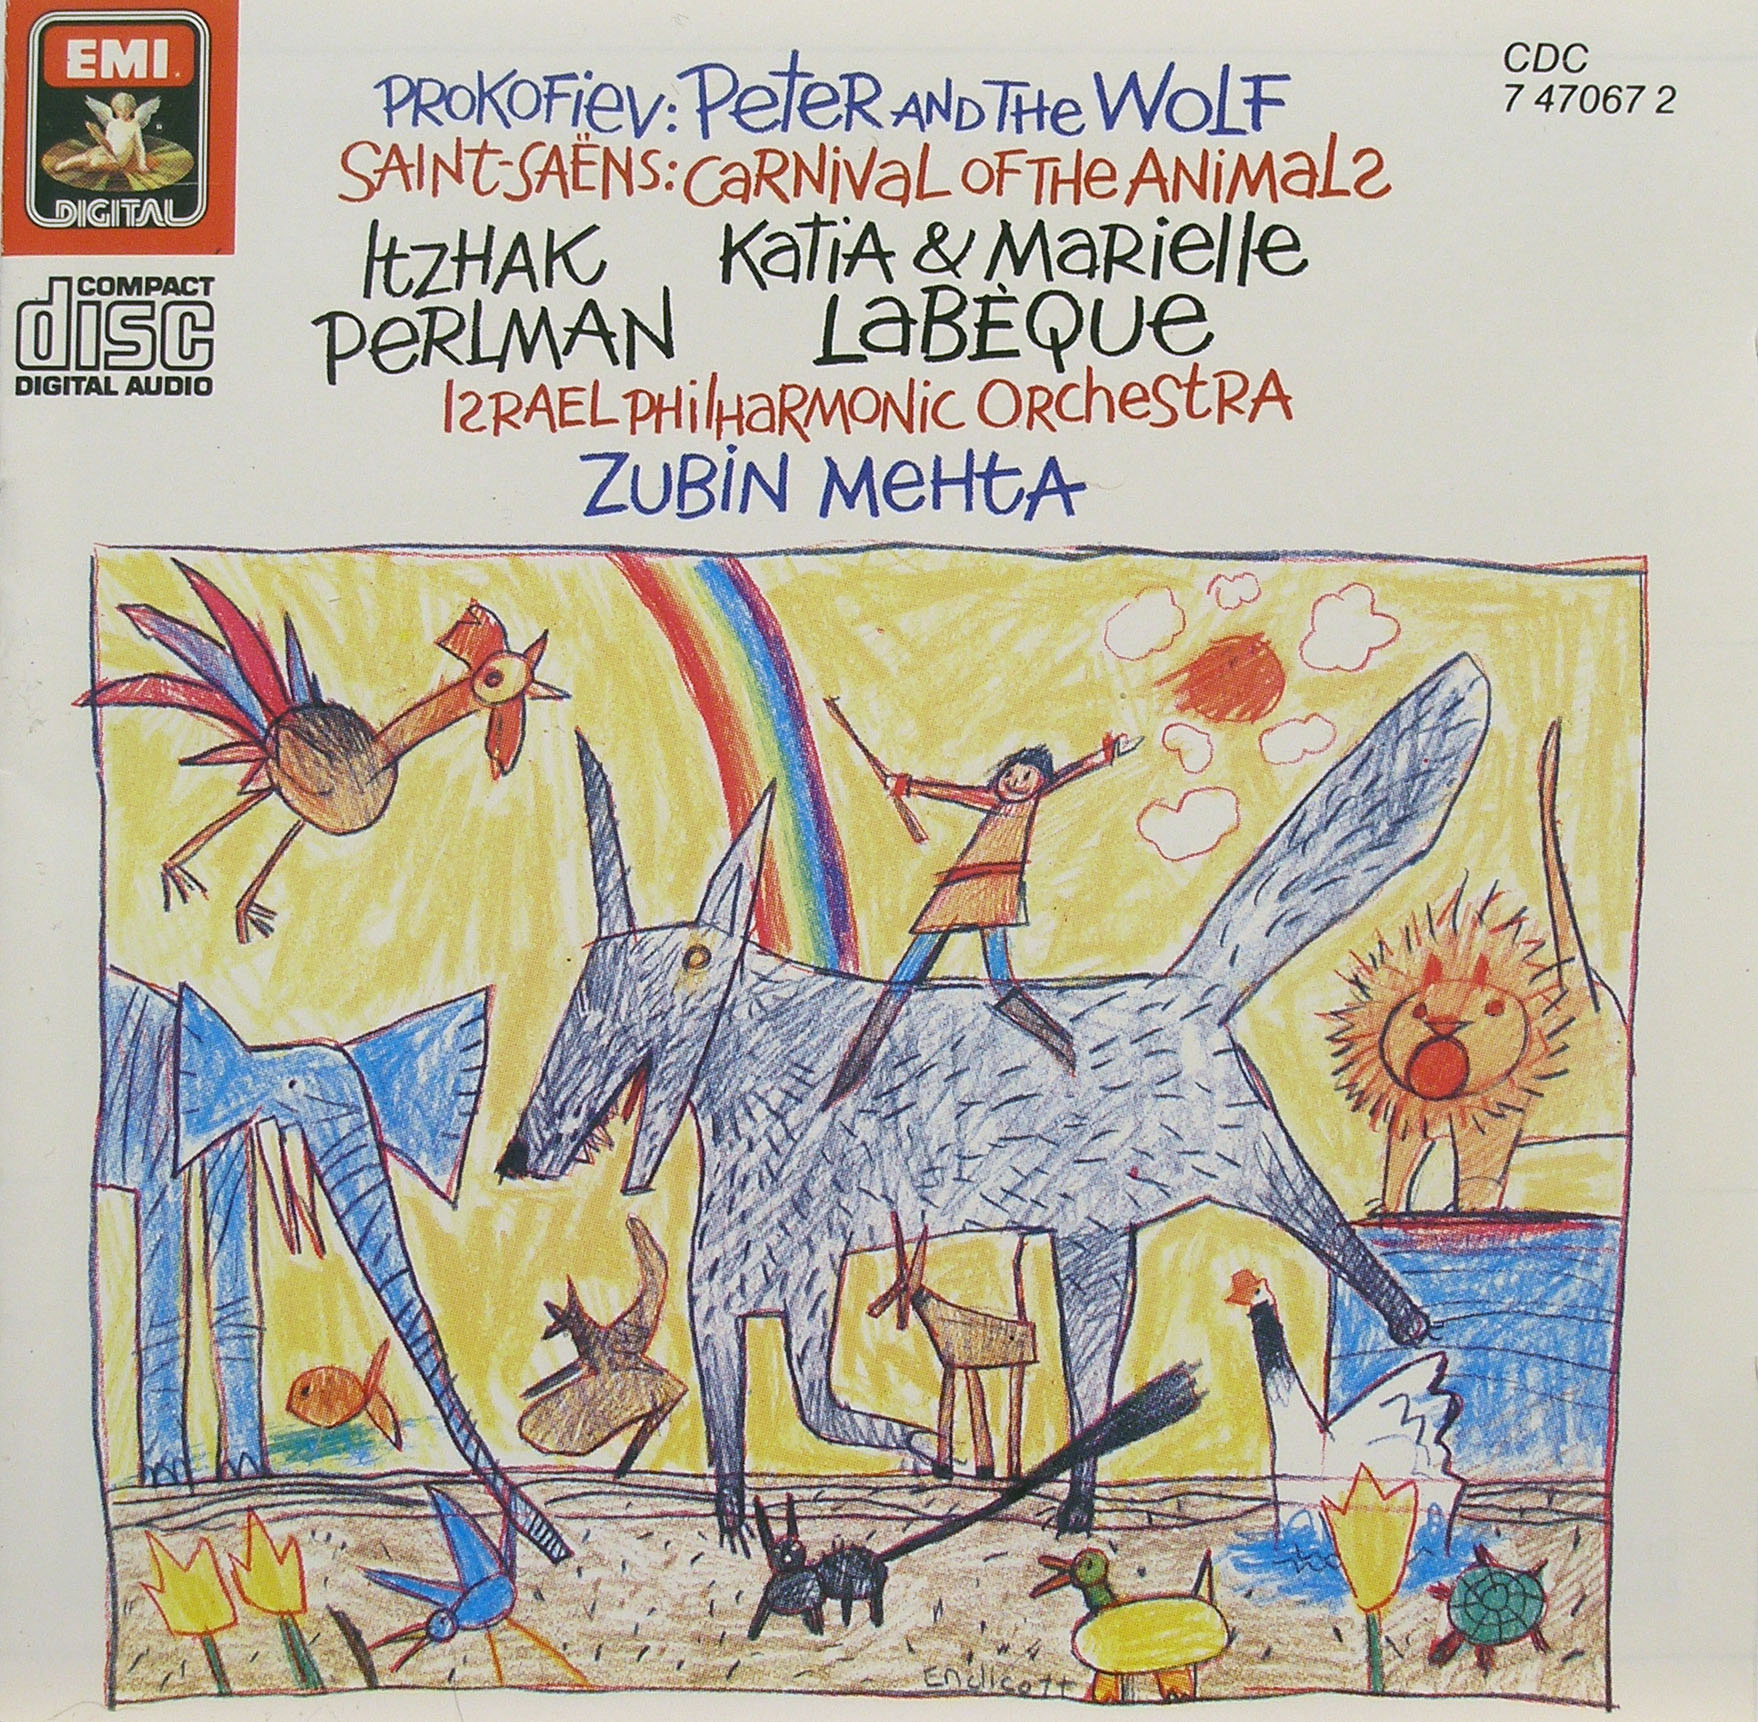 Peter and Wolf Prokofiev CD